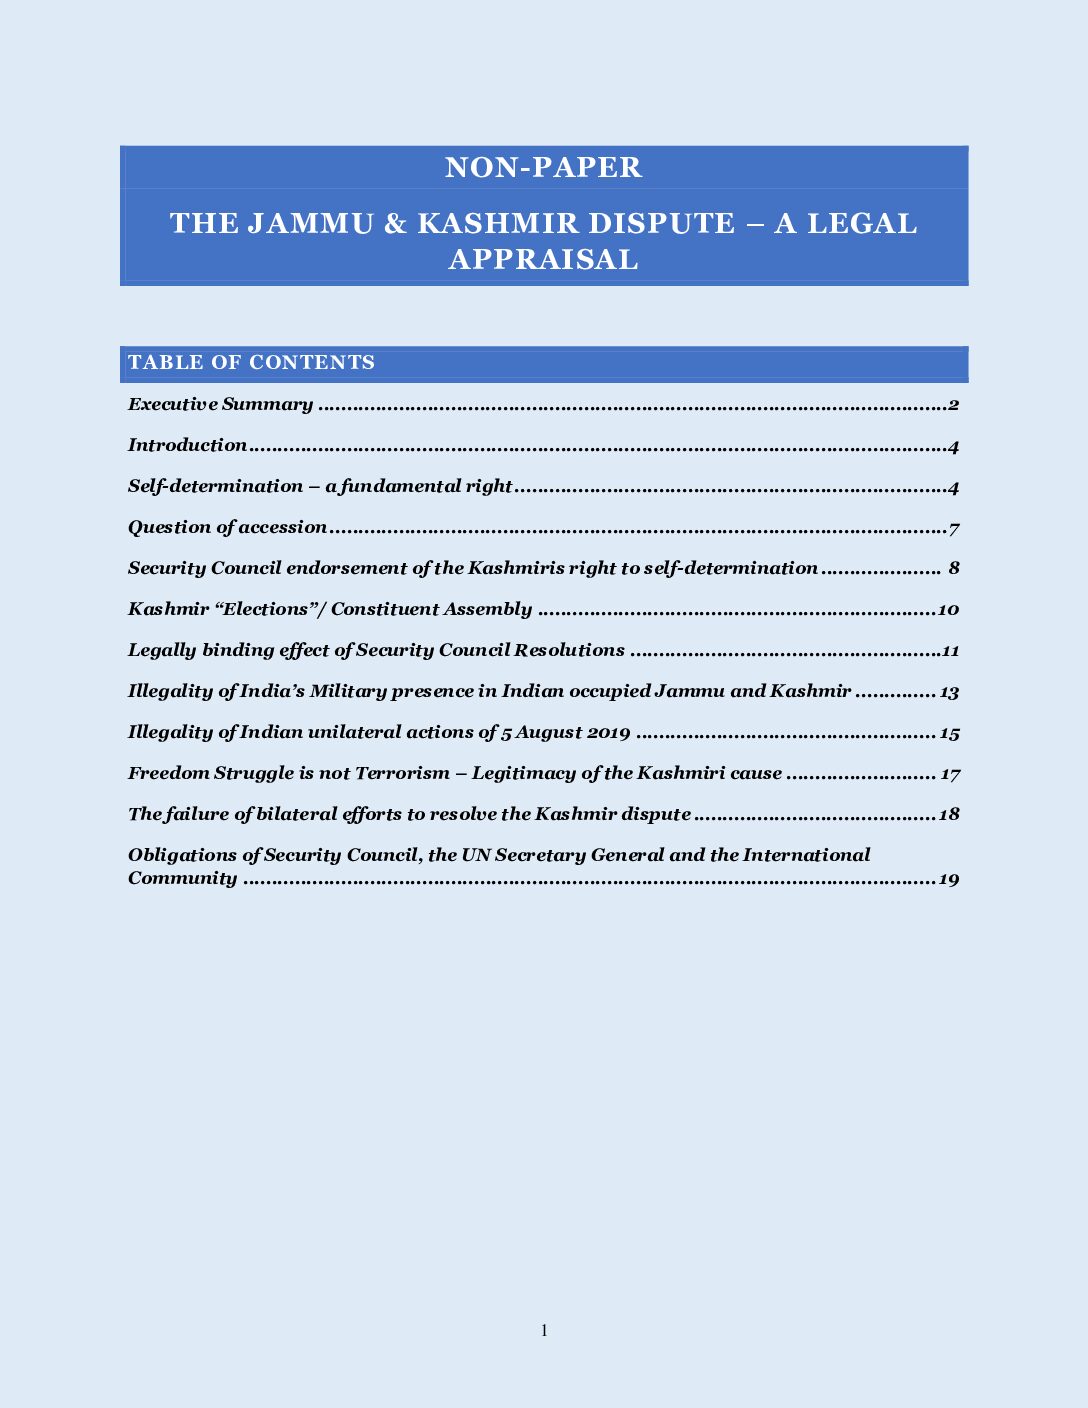 Non-Paper on  The Jammu and Kashmir Dispute – A Legal Appraisal